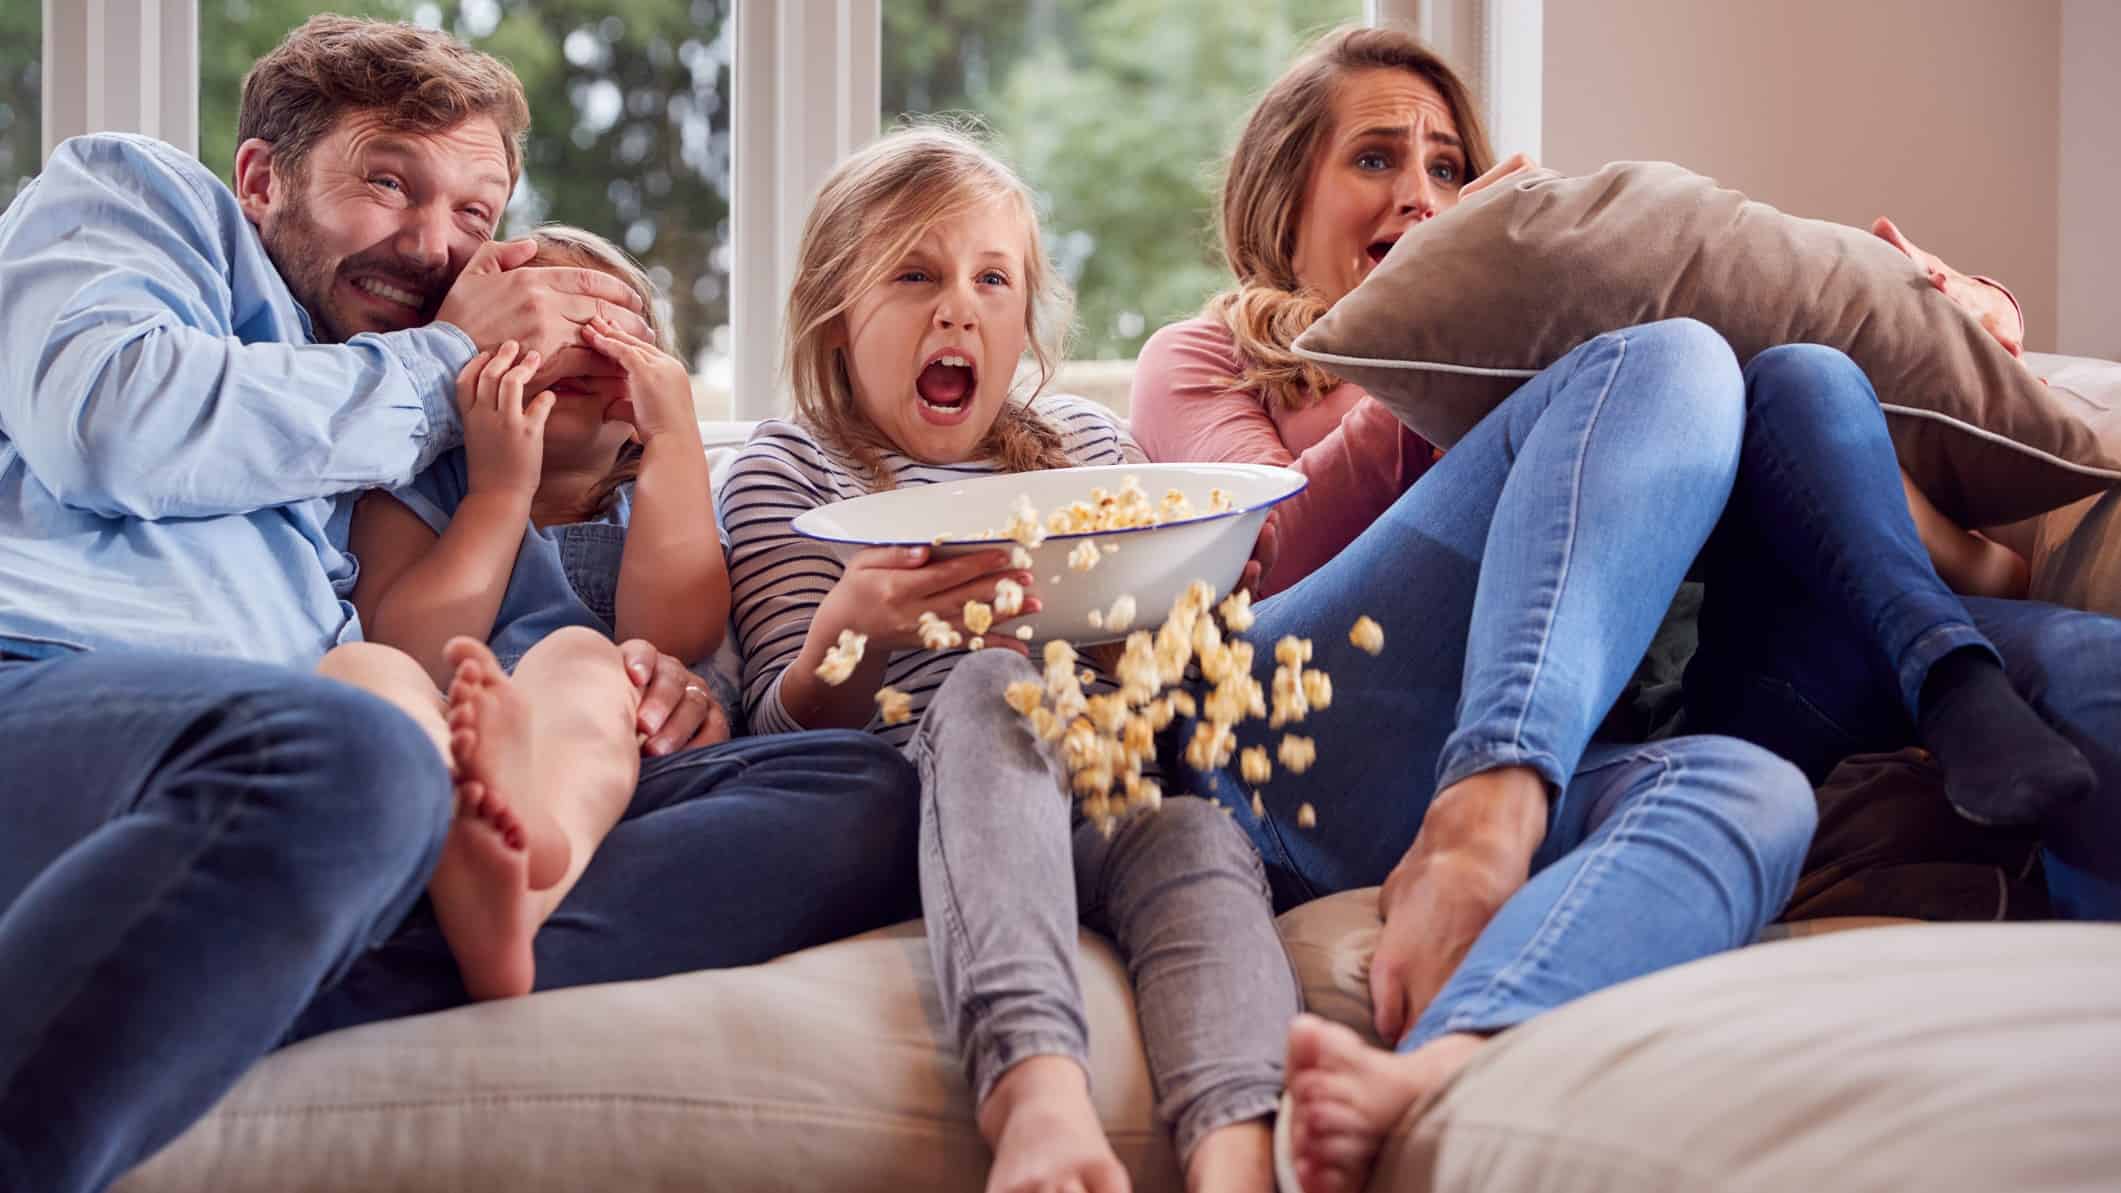 A family of three look scared as they watch a movie on the sofa with popcorn.